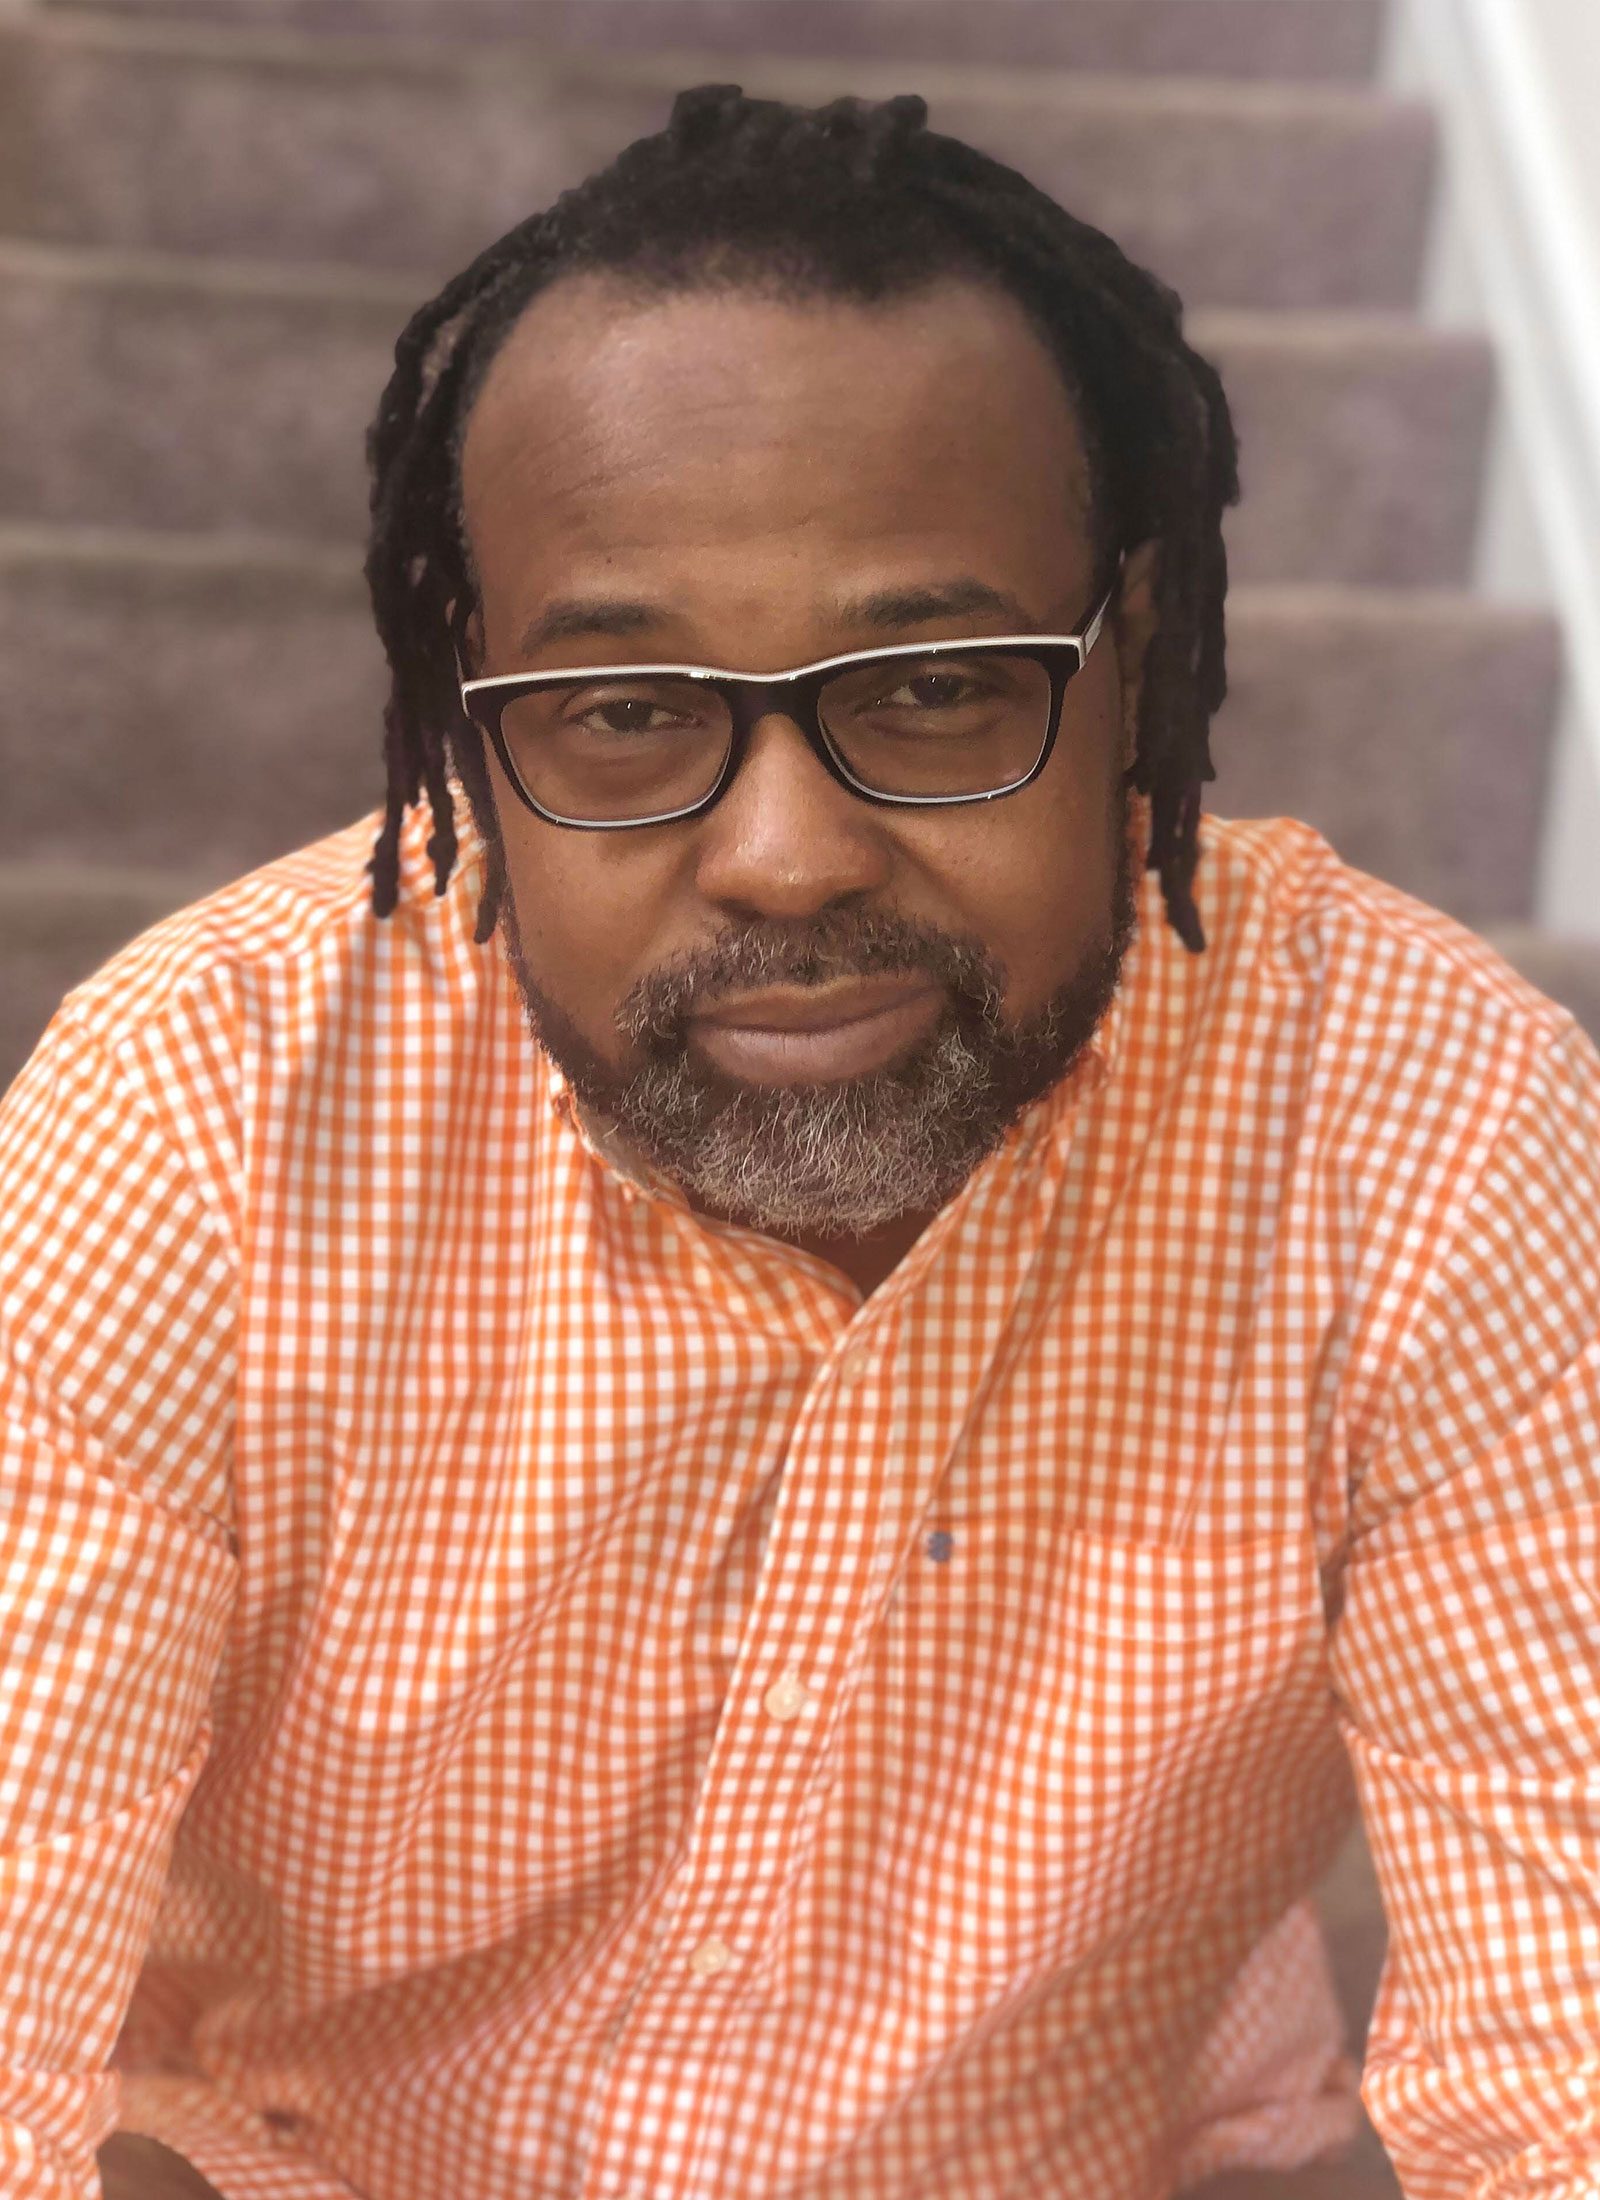 A man with dreads and glasses sitting on steps.